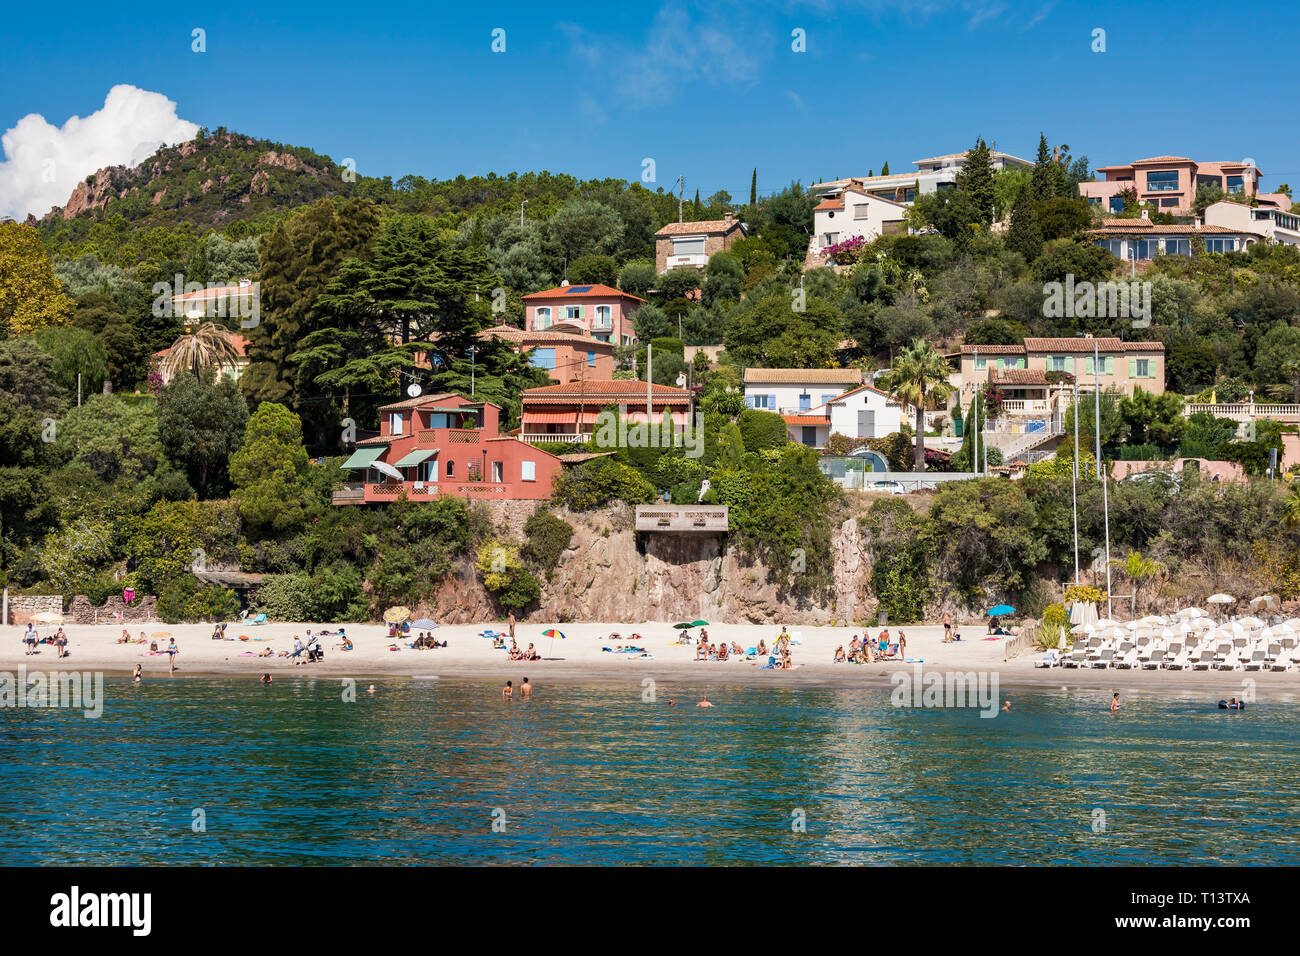 France, Provence-Alpes-Cote d'Azur, Theoule-sur-Mer, beach and holiday homes Stock Photo